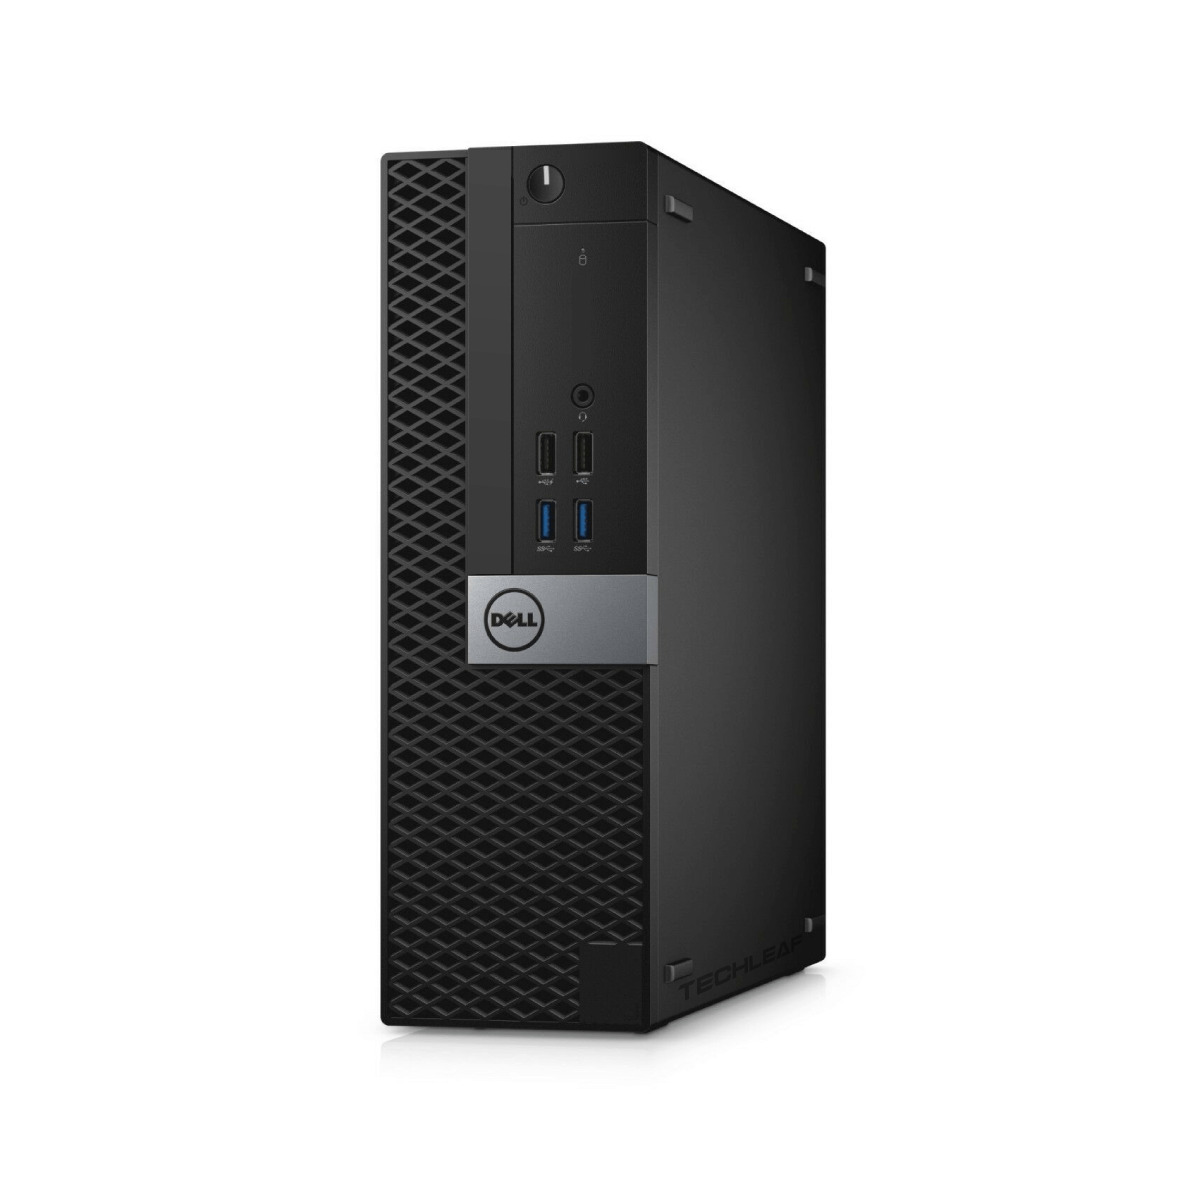 Dell Desktop Computer PC i5, up to 16GB RAM, 4TB SSD, 22